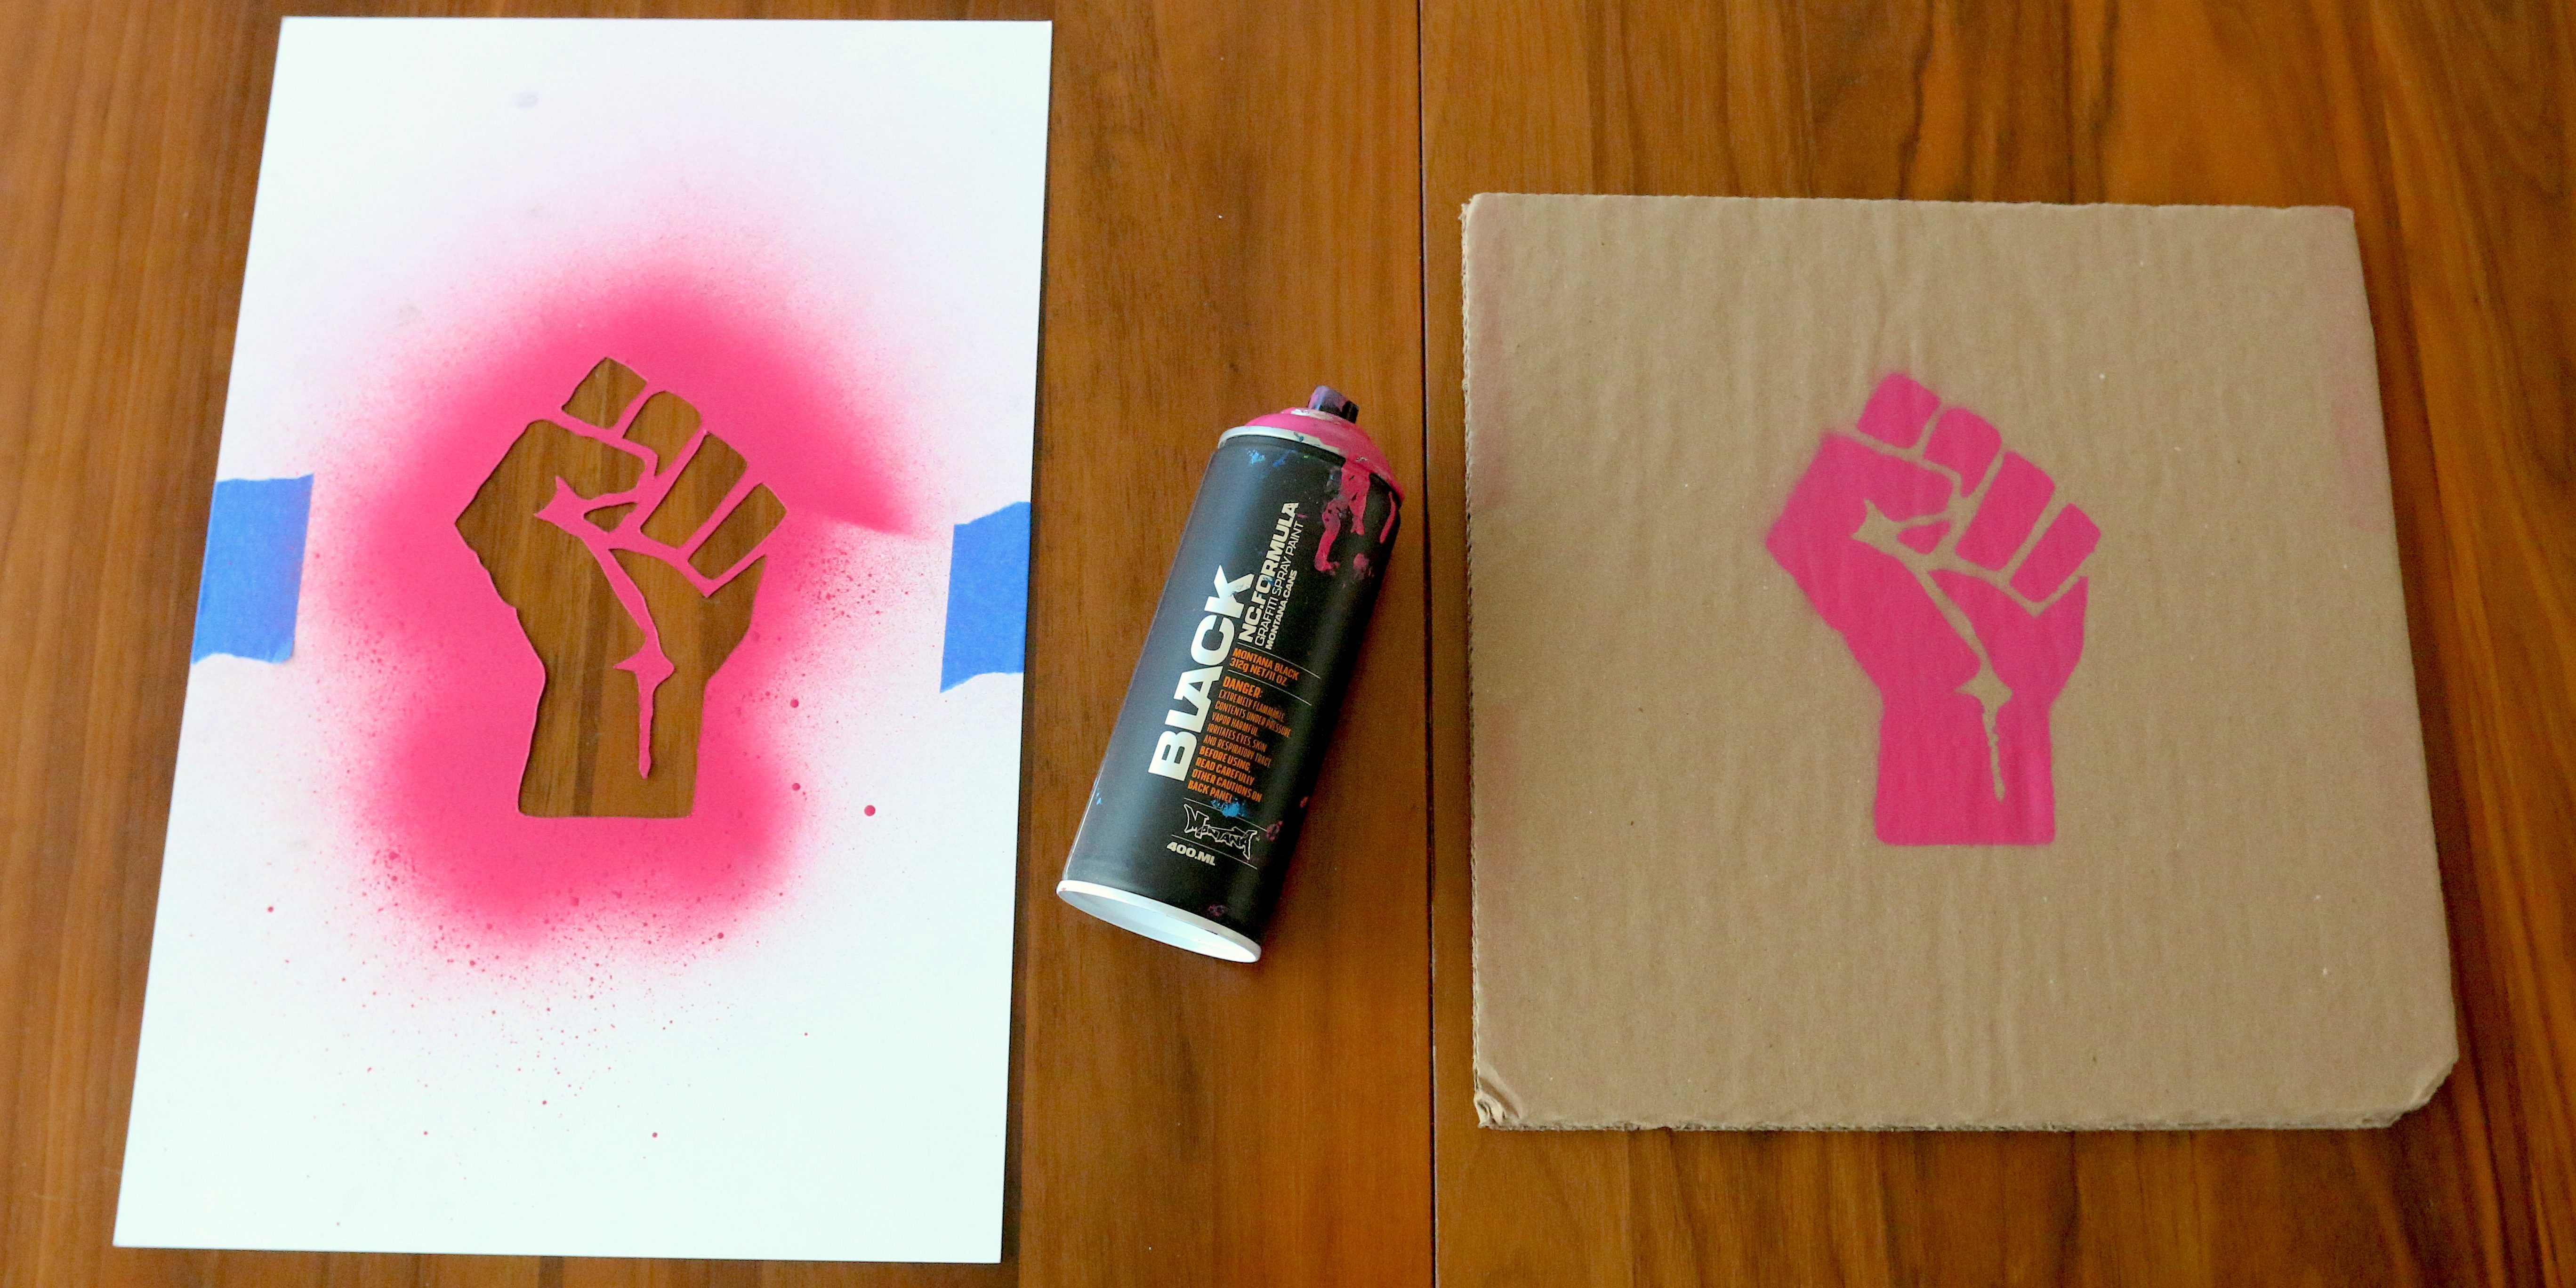 How To Make A Stencil For Spray Paint Gilbert Guine1979